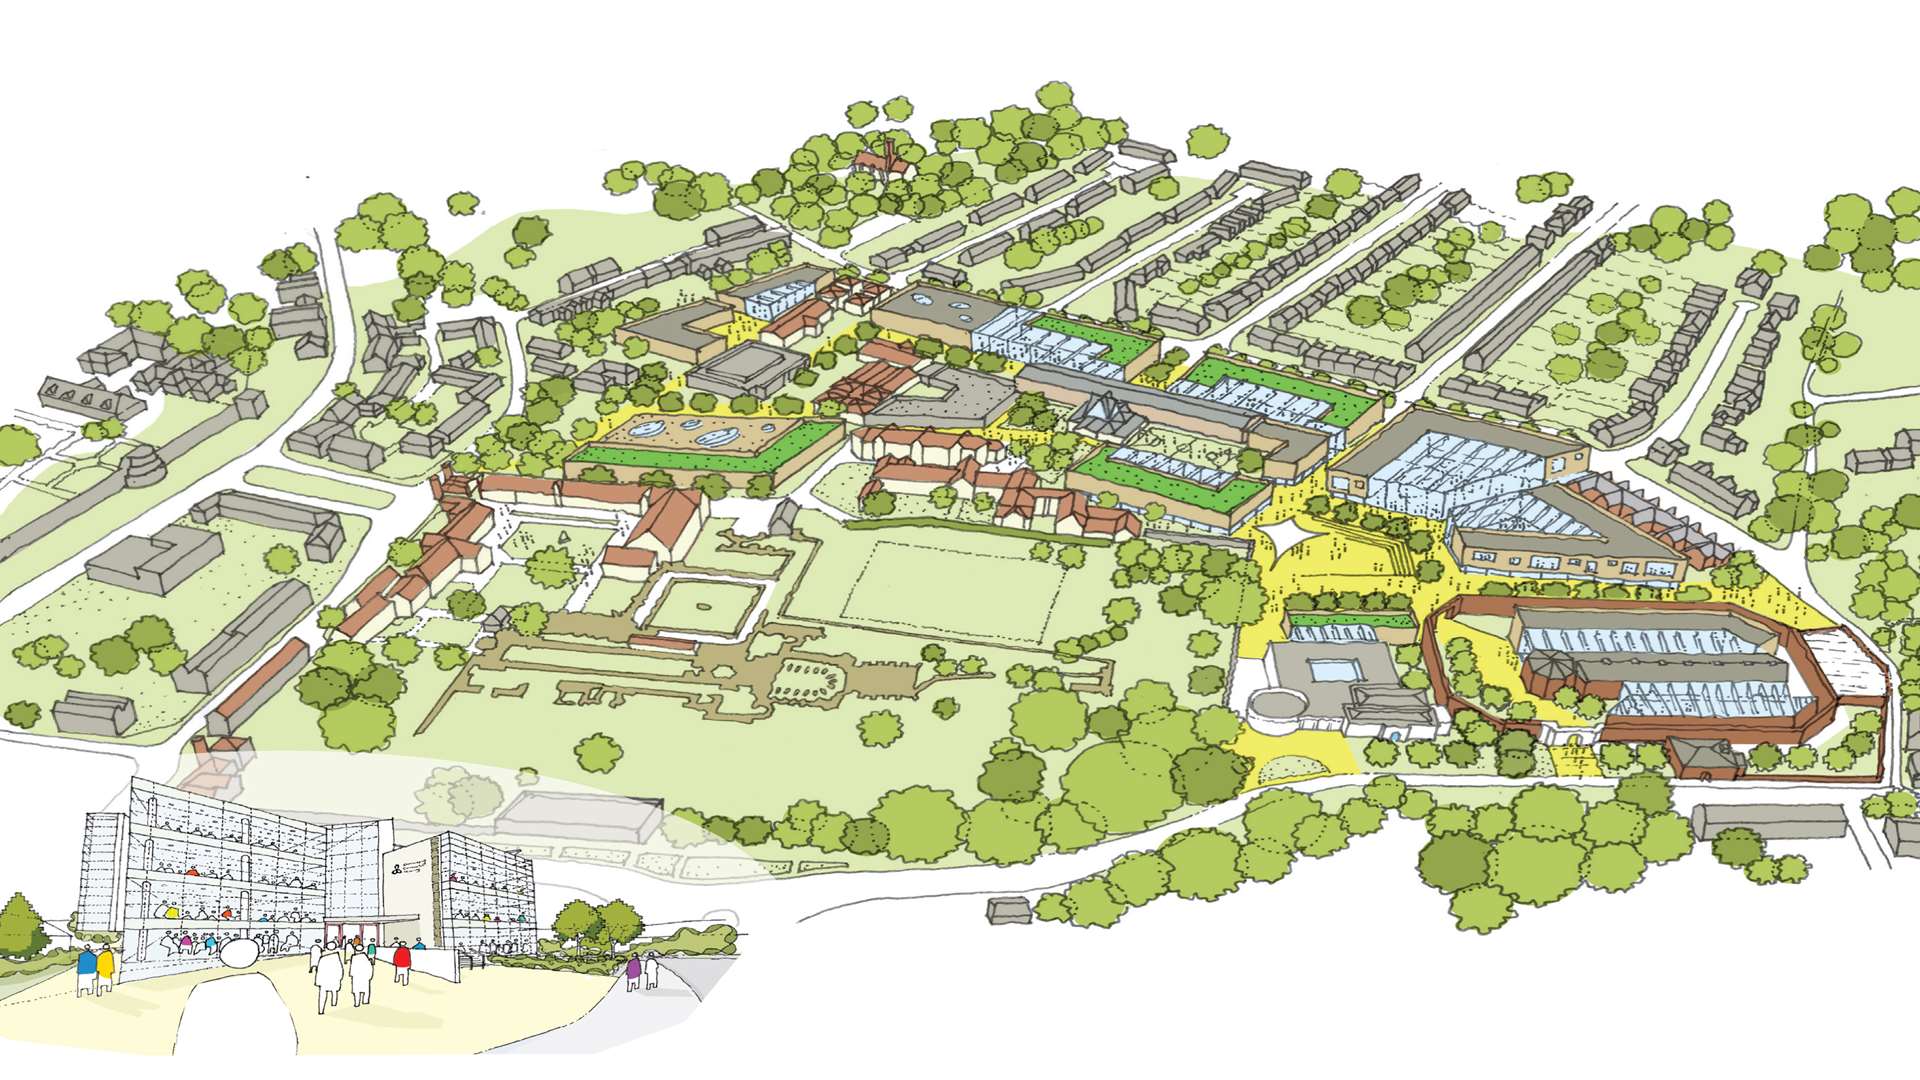 Plans would see the city centre campus transformed